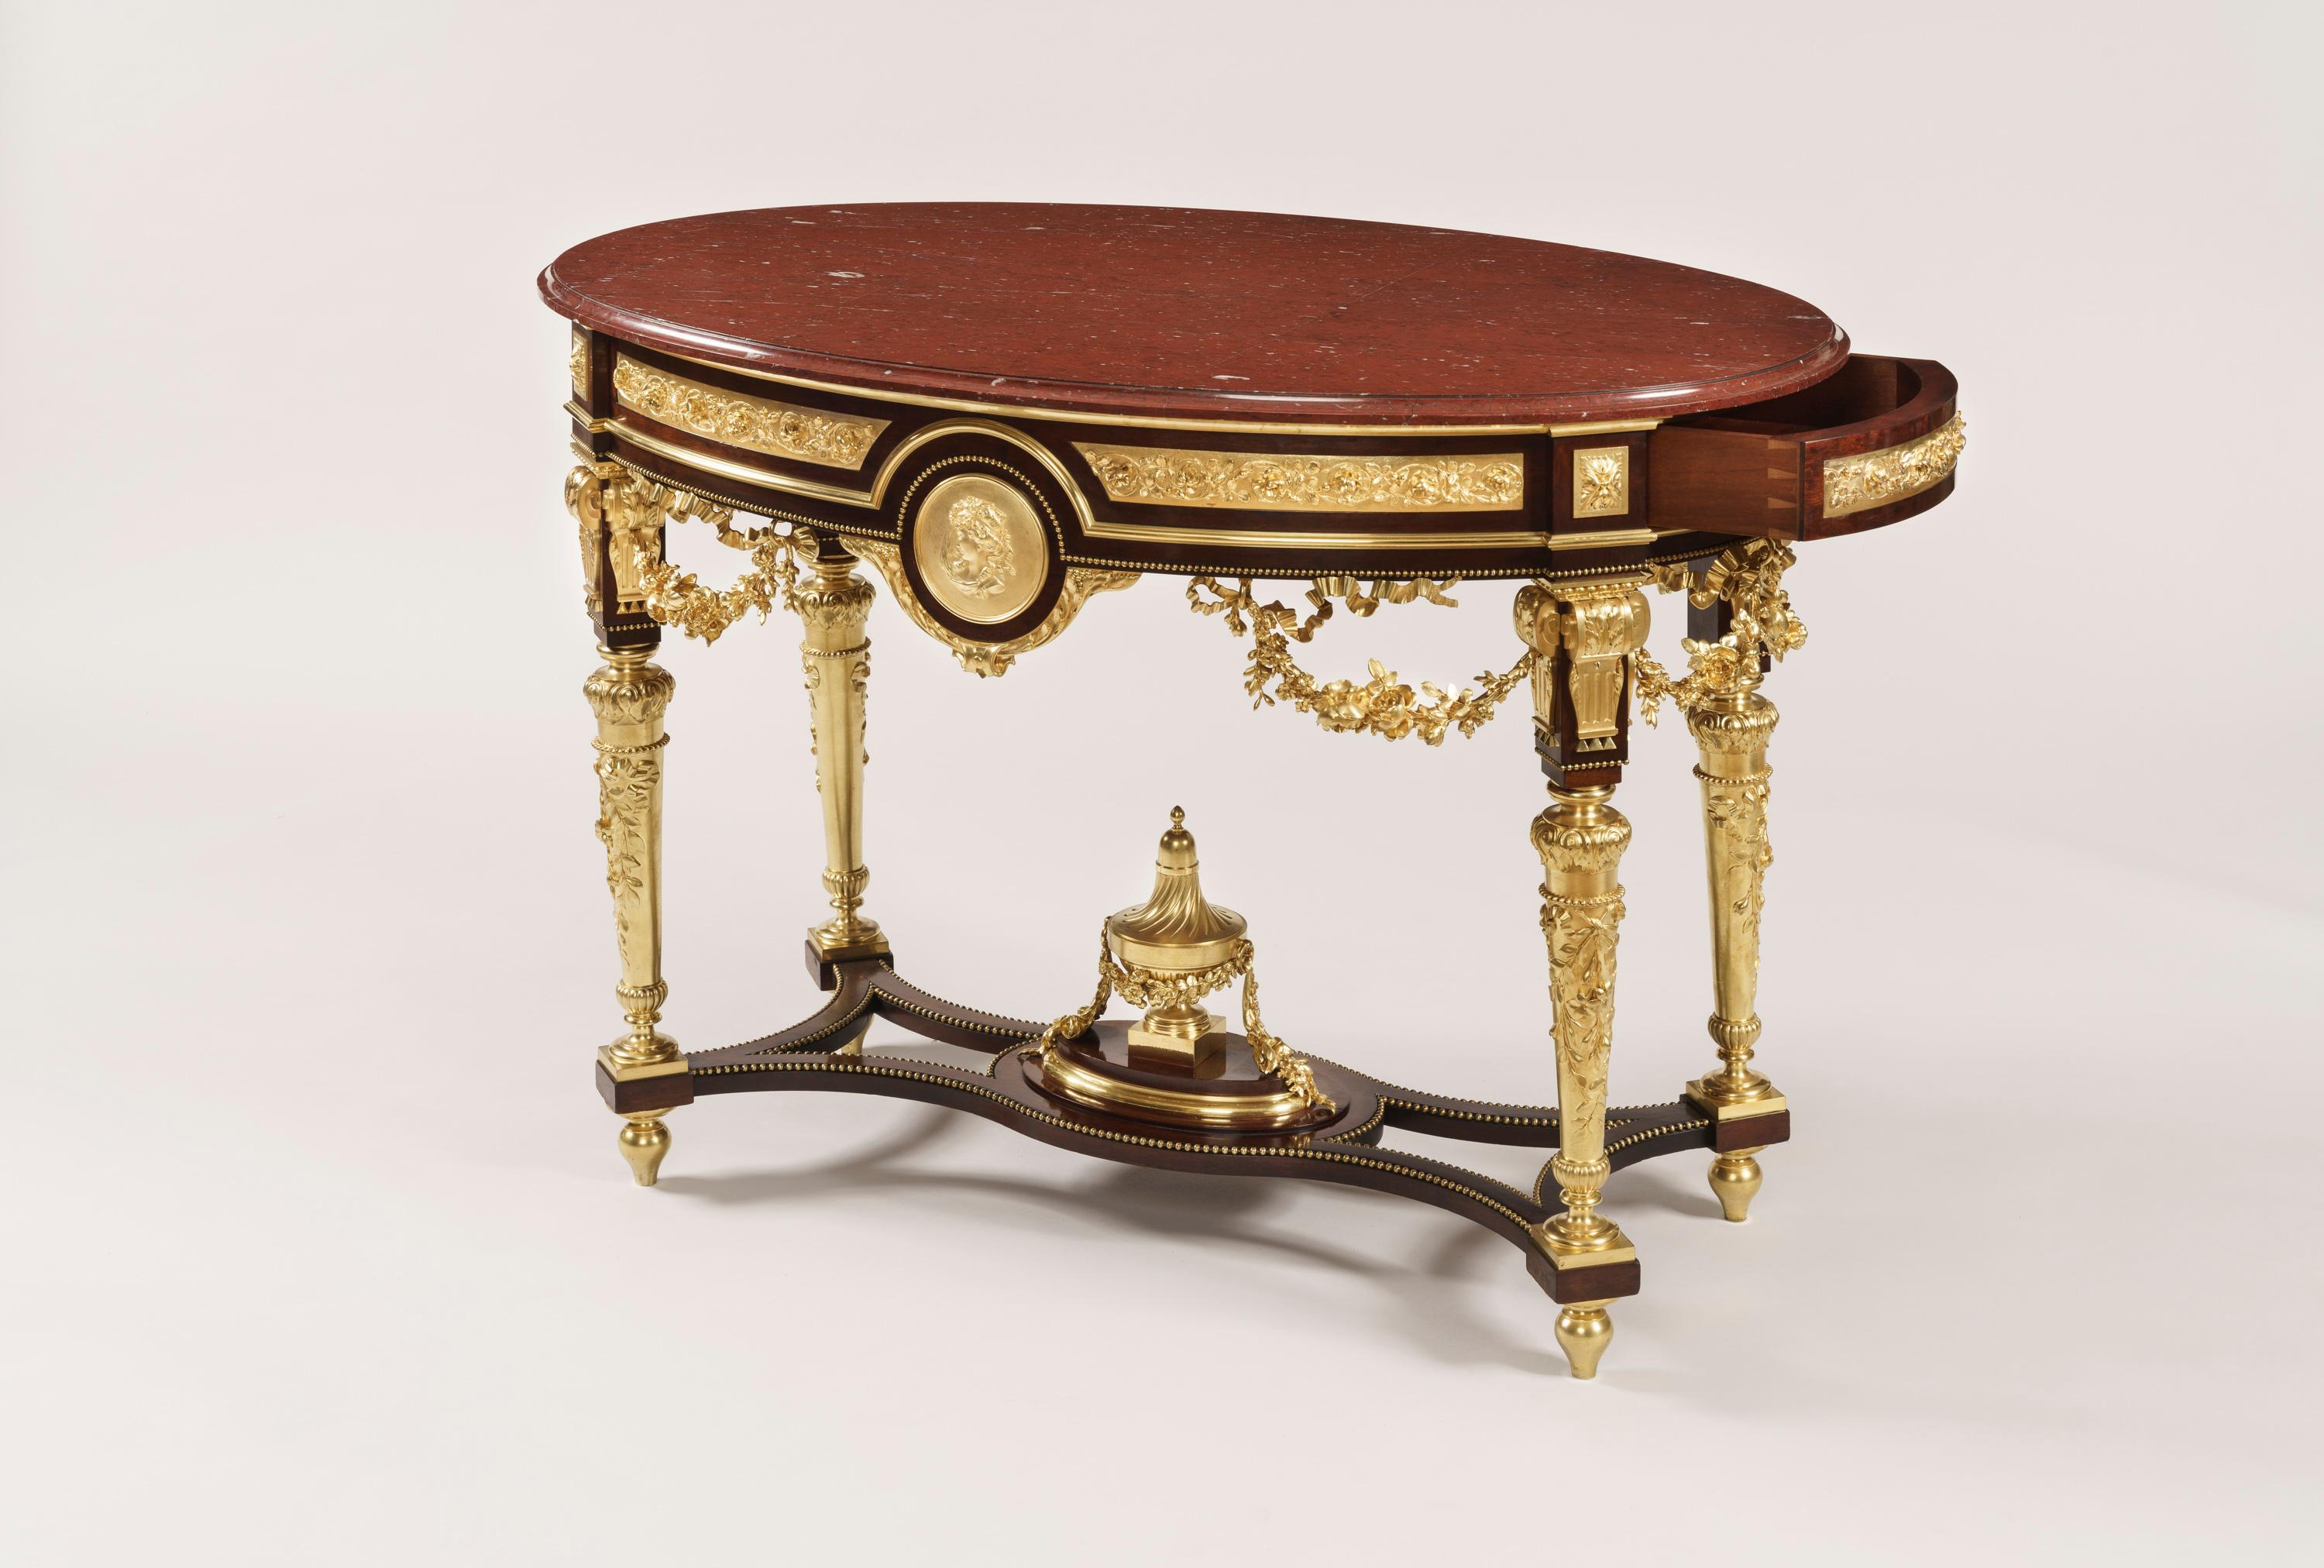 A superb centre table in the Louis XVI manner.

Of free standing elliptical form, the mahogany frame richly decorated with finely cast and chased ormolu, and having a thumbnail molded edge Griotte Pyrenean platform; rising from tapered ormolu